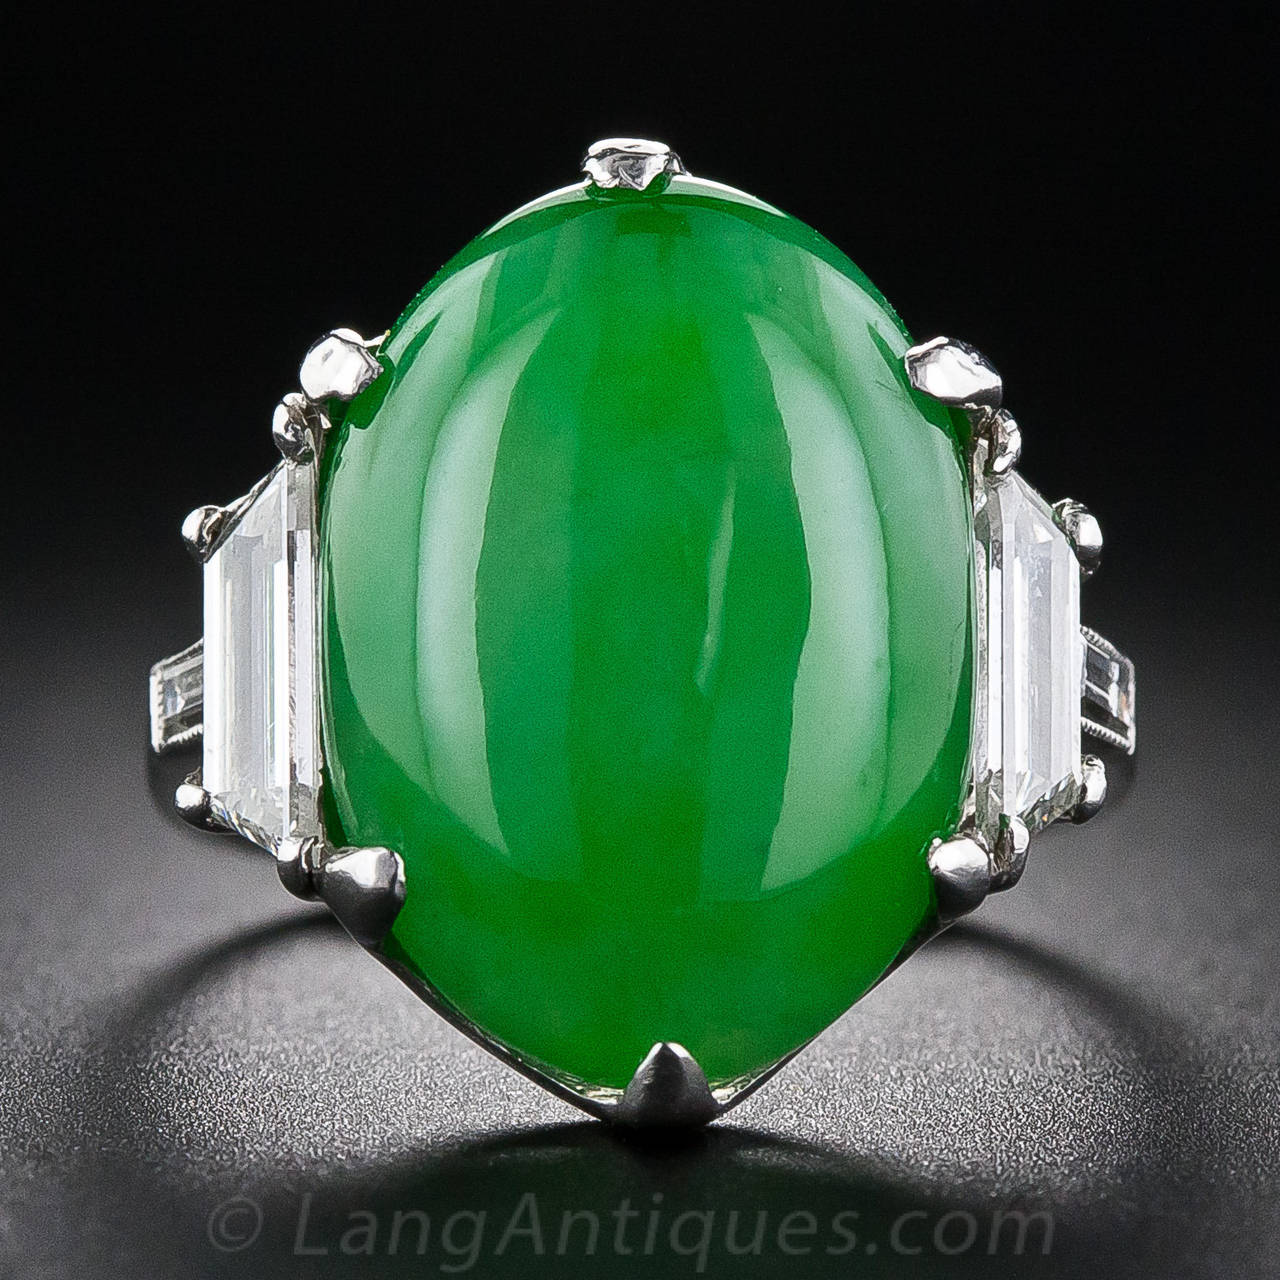 An impressive Art Deco ring set with a jadeite cabochon of vibrant green, accompanied by a GIA certificate stating natural color, flanked by two elegant trapezoid diamonds with baguette diamonds on the shoulders. The handmade platinum setting is